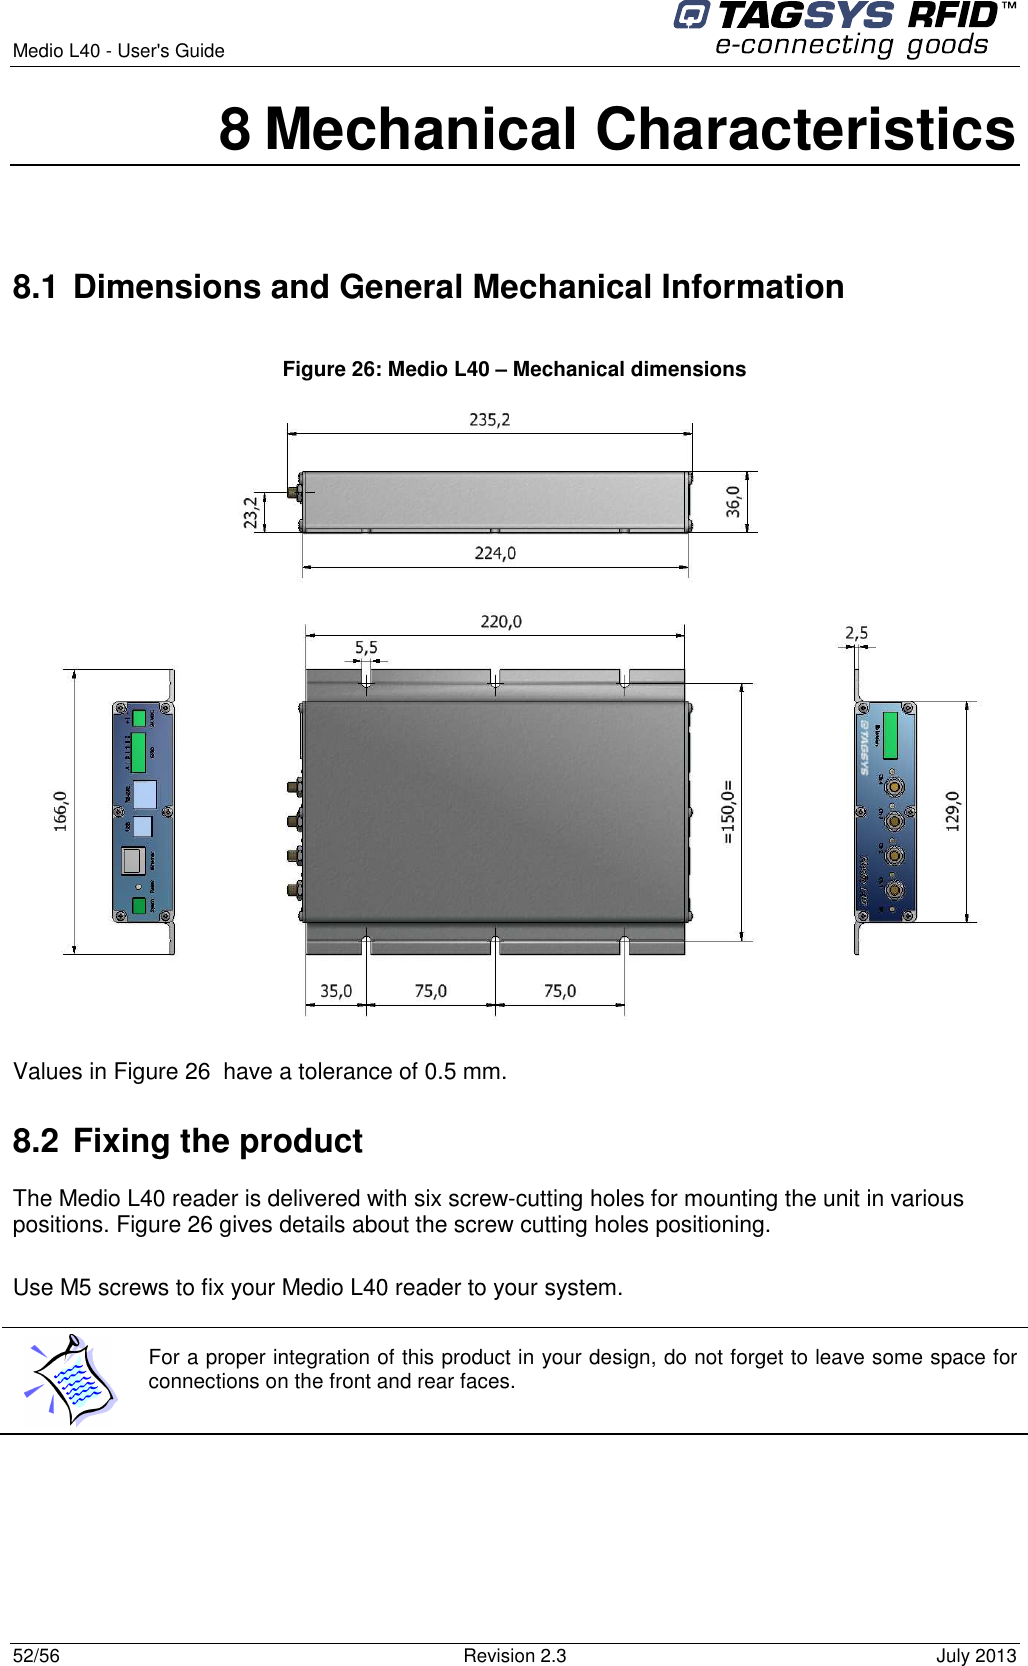  Medio L40 - User&apos;s Guide     52/56  Revision 2.3  July 2013  8 Mechanical Characteristics  8.1 Dimensions and General Mechanical Information  Figure 26: Medio L40 – Mechanical dimensions  Values in Figure 26  have a tolerance of 0.5 mm. 8.2 Fixing the product The Medio L40 reader is delivered with six screw-cutting holes for mounting the unit in various positions. Figure 26 gives details about the screw cutting holes positioning.  Use M5 screws to fix your Medio L40 reader to your system.   For a proper integration of this product in your design, do not forget to leave some space for connections on the front and rear faces.   